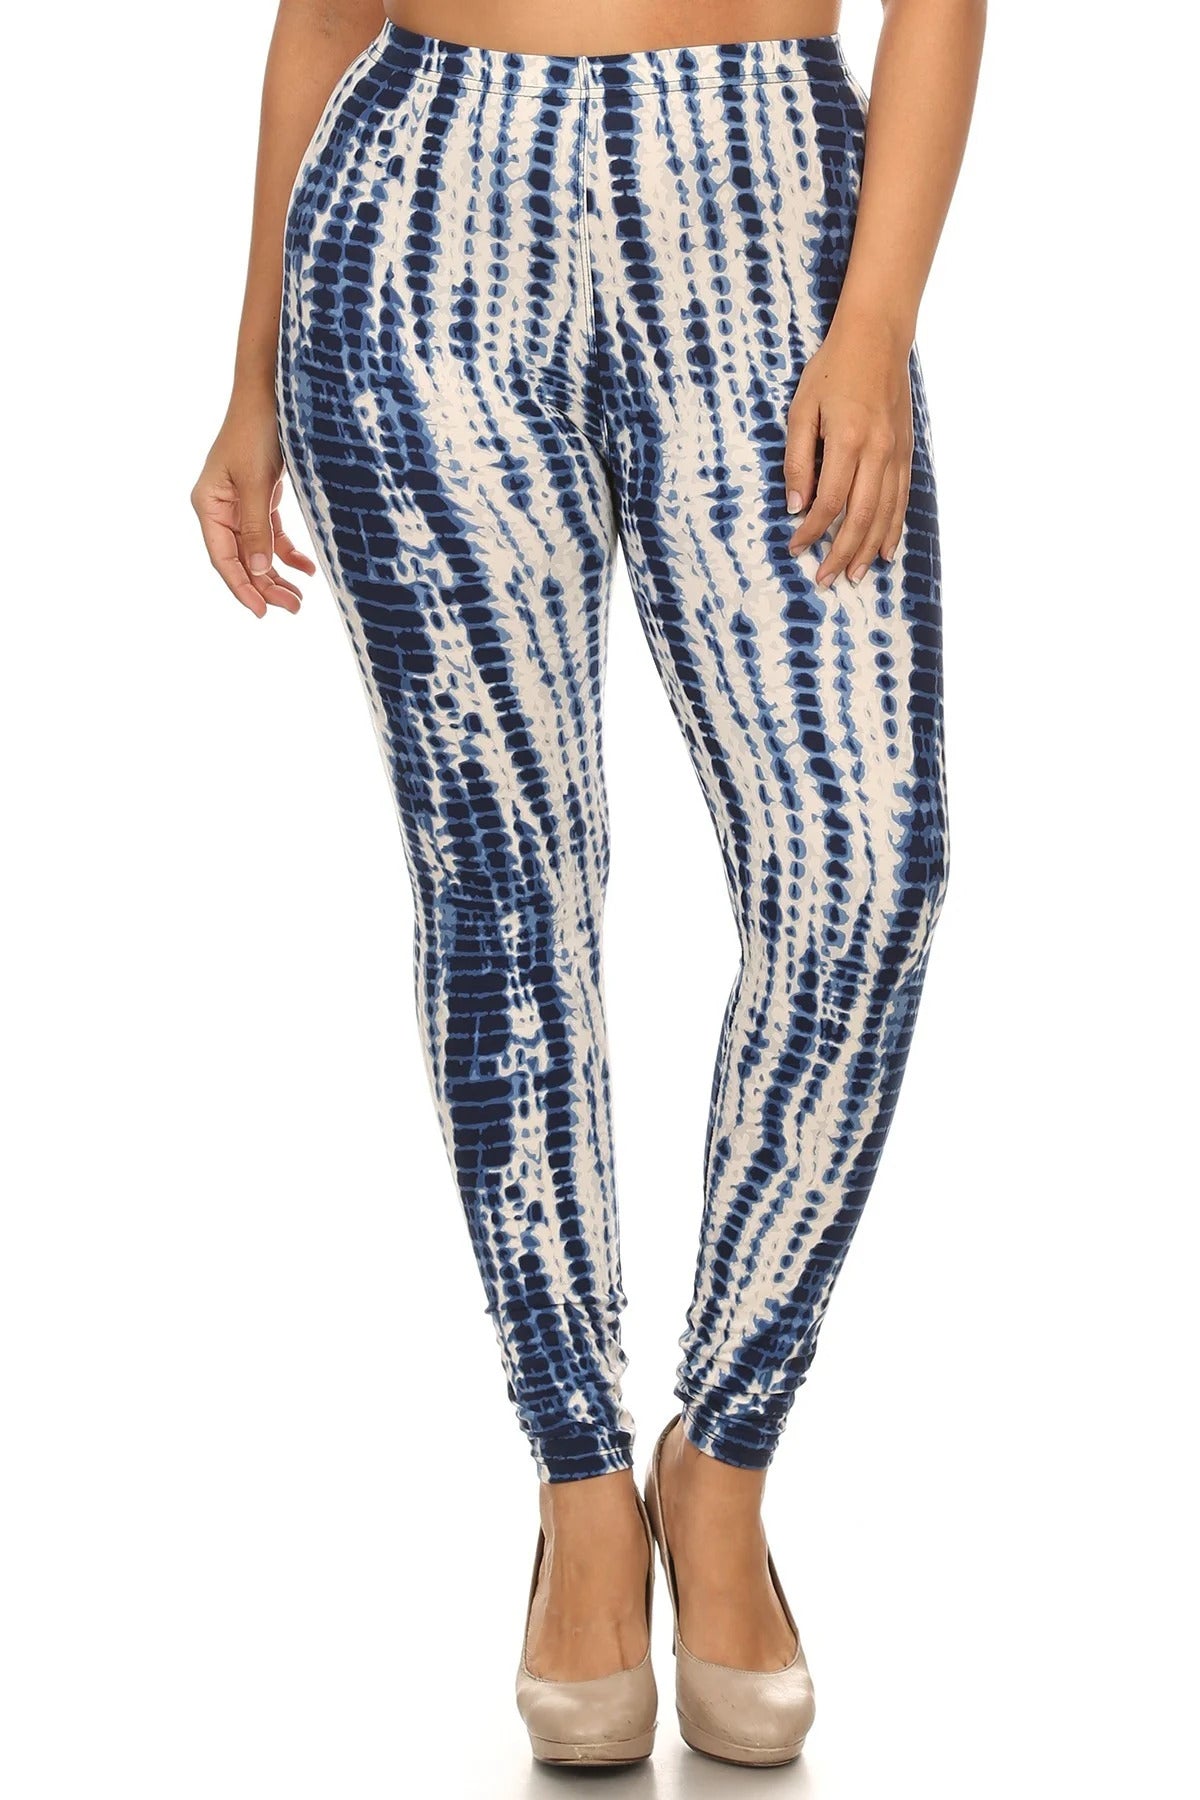 Plus Size Tie Dye Print, Full Length Leggings In A Slim Fitting Style With A Banded High Waist - Tigbuls Variety Fashion